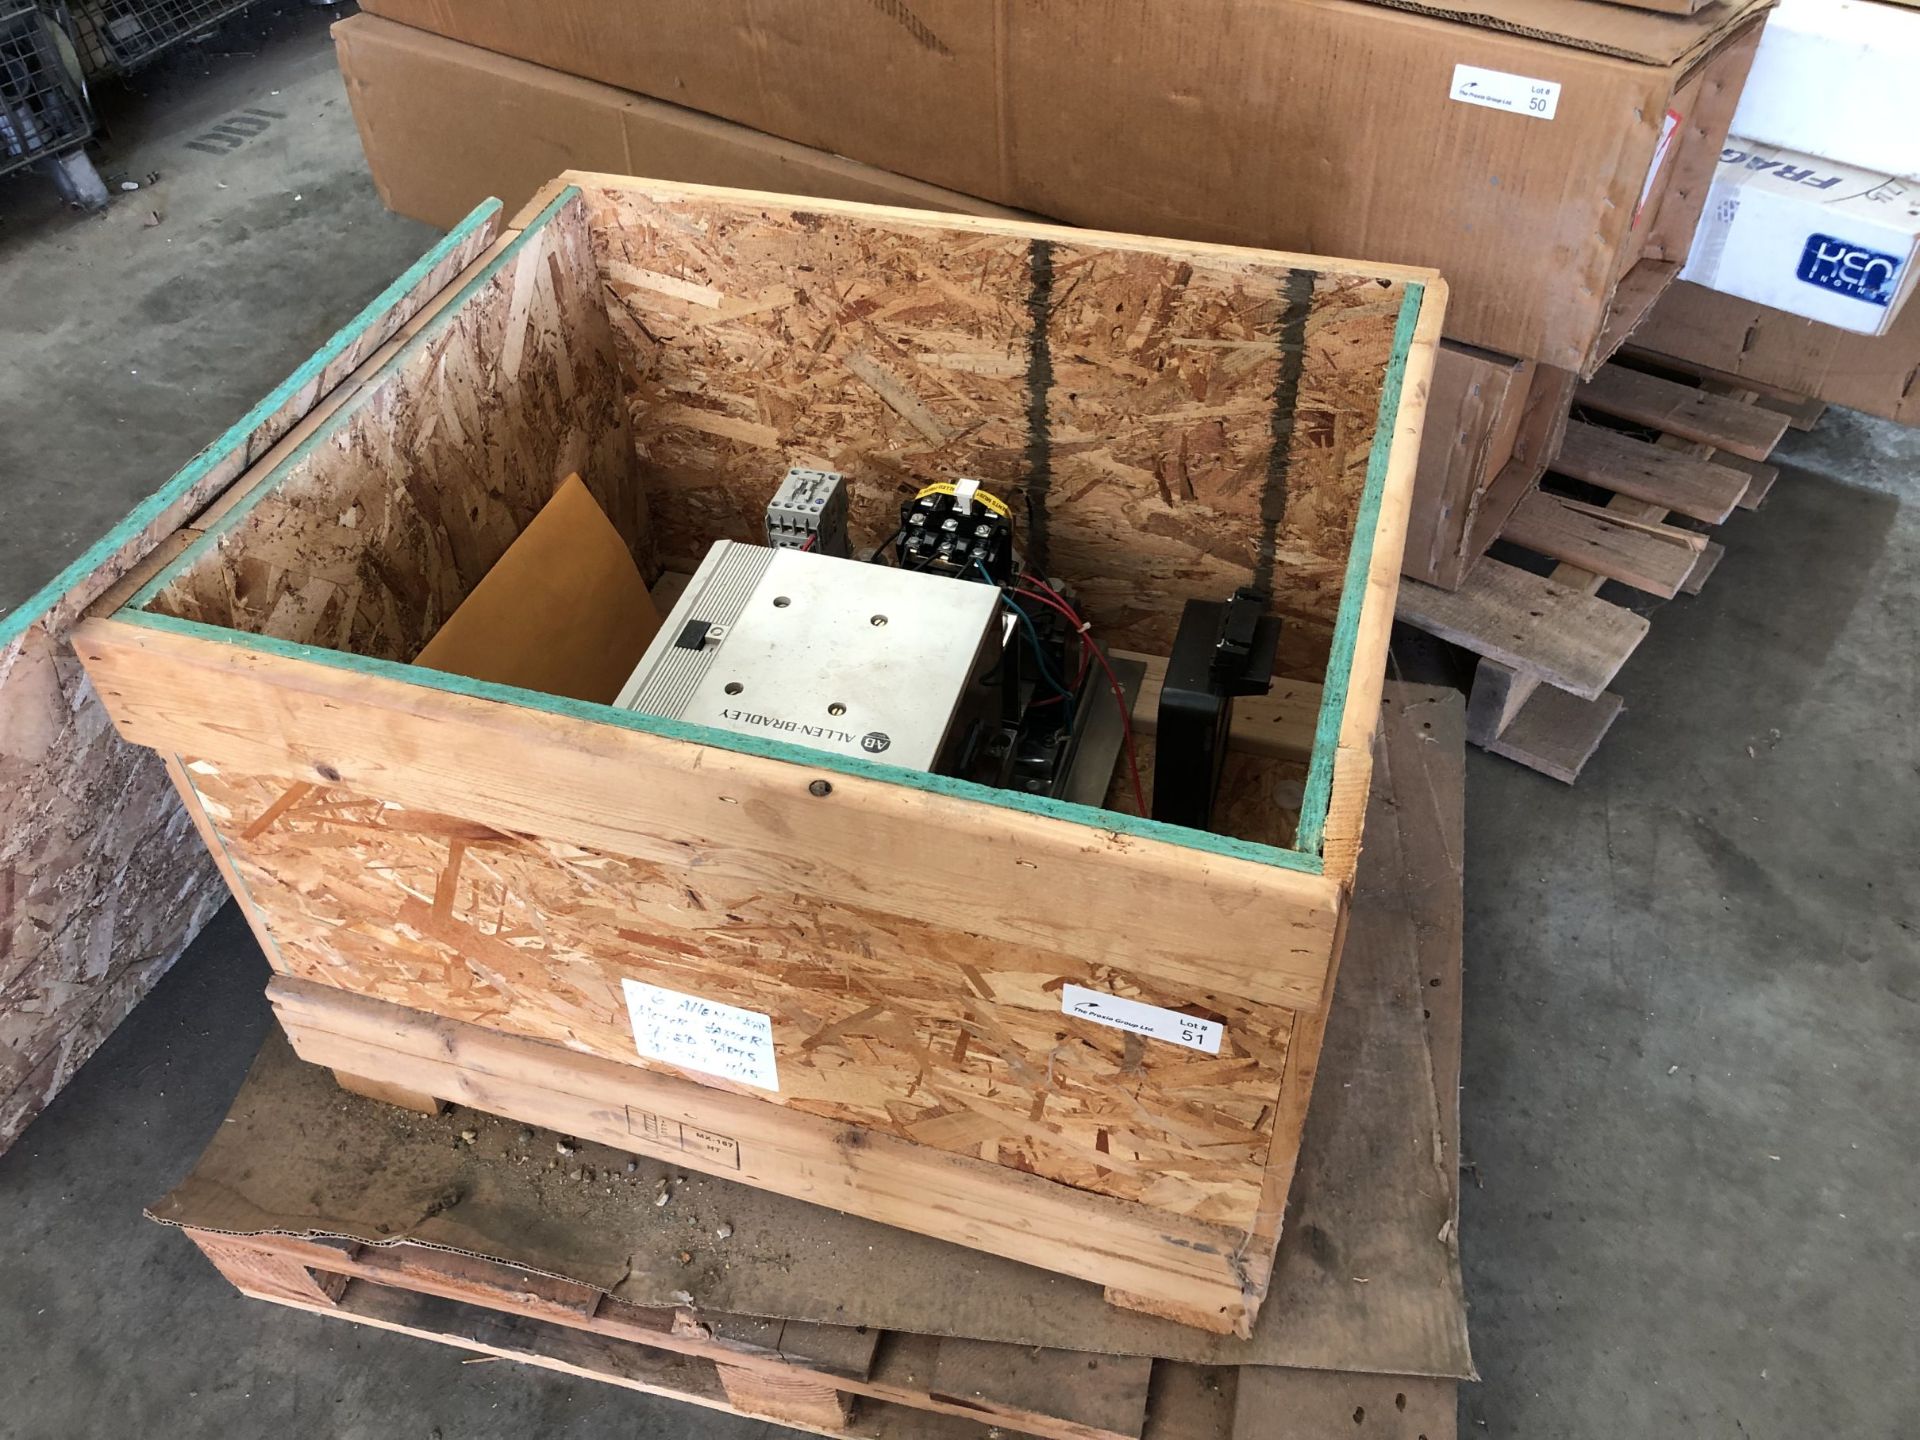 Allen Bradley 500-G0B930 Contactor Rated for 400HP Motor 480V, 1&3ph, 60Hz Unused in Crate - Image 2 of 4